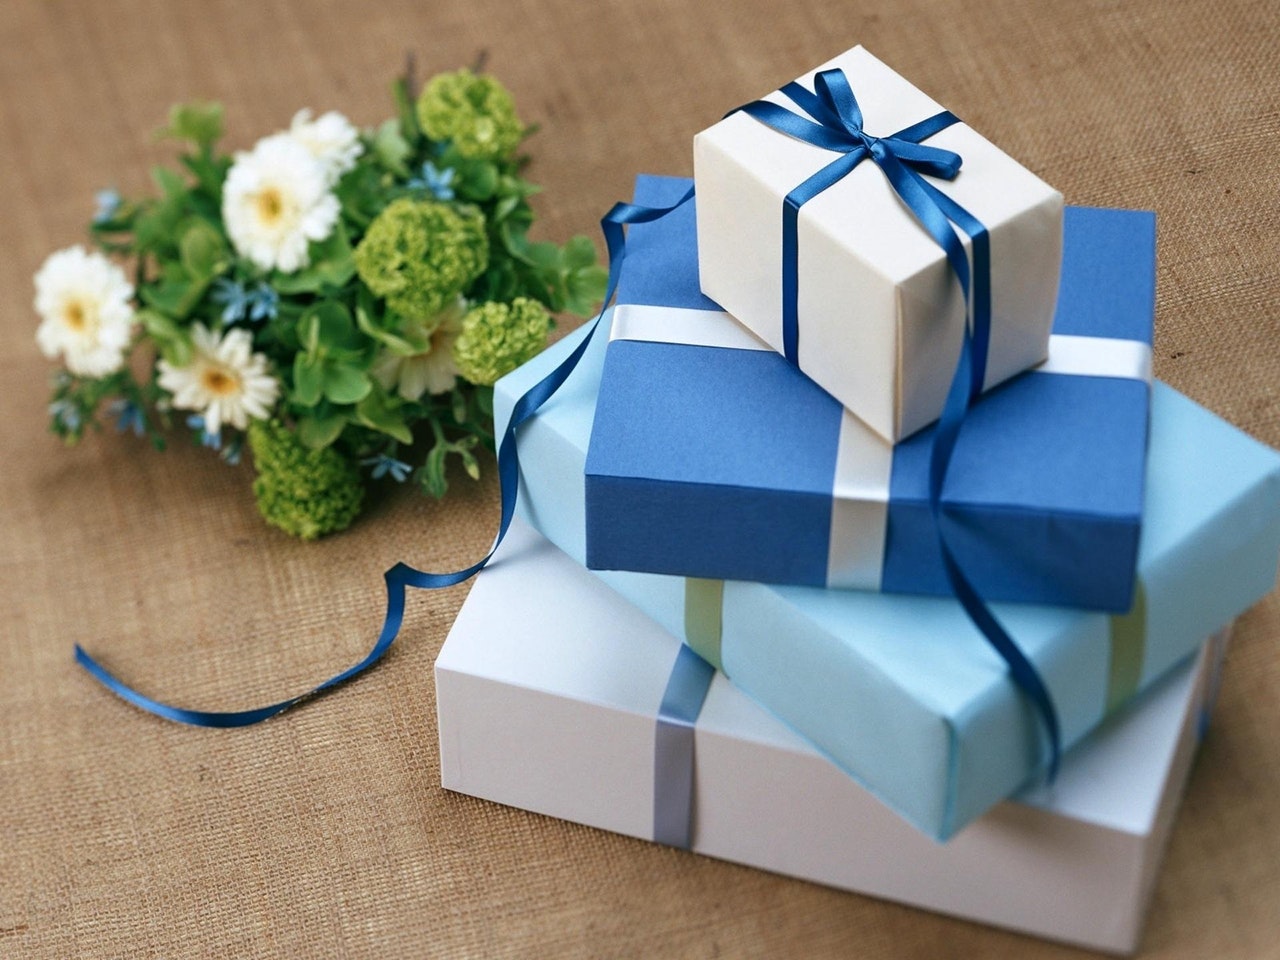 https://www.u-drive.com.au/wp-content/uploads/sites/103/2020/03/blue-gifts-wrapped-stacked-on-top-of-each-other.jpg